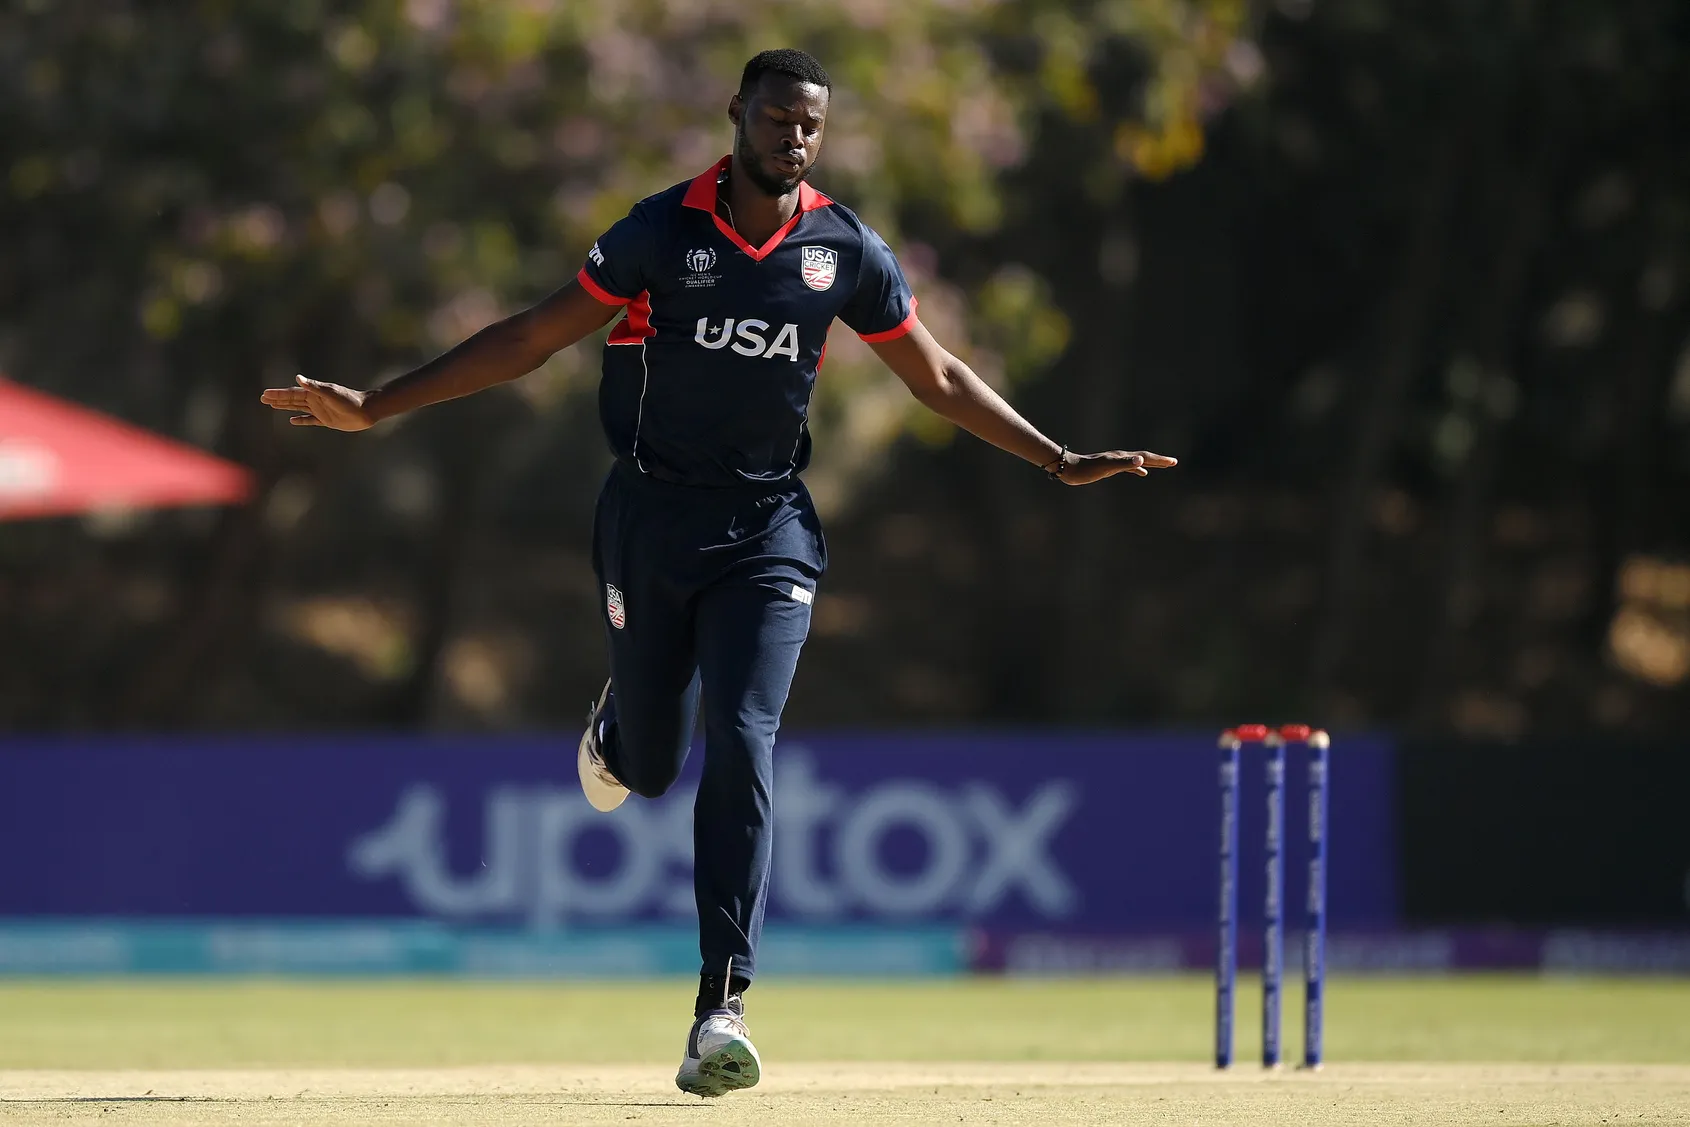 USA's Kyle Phillip suspended from bowling